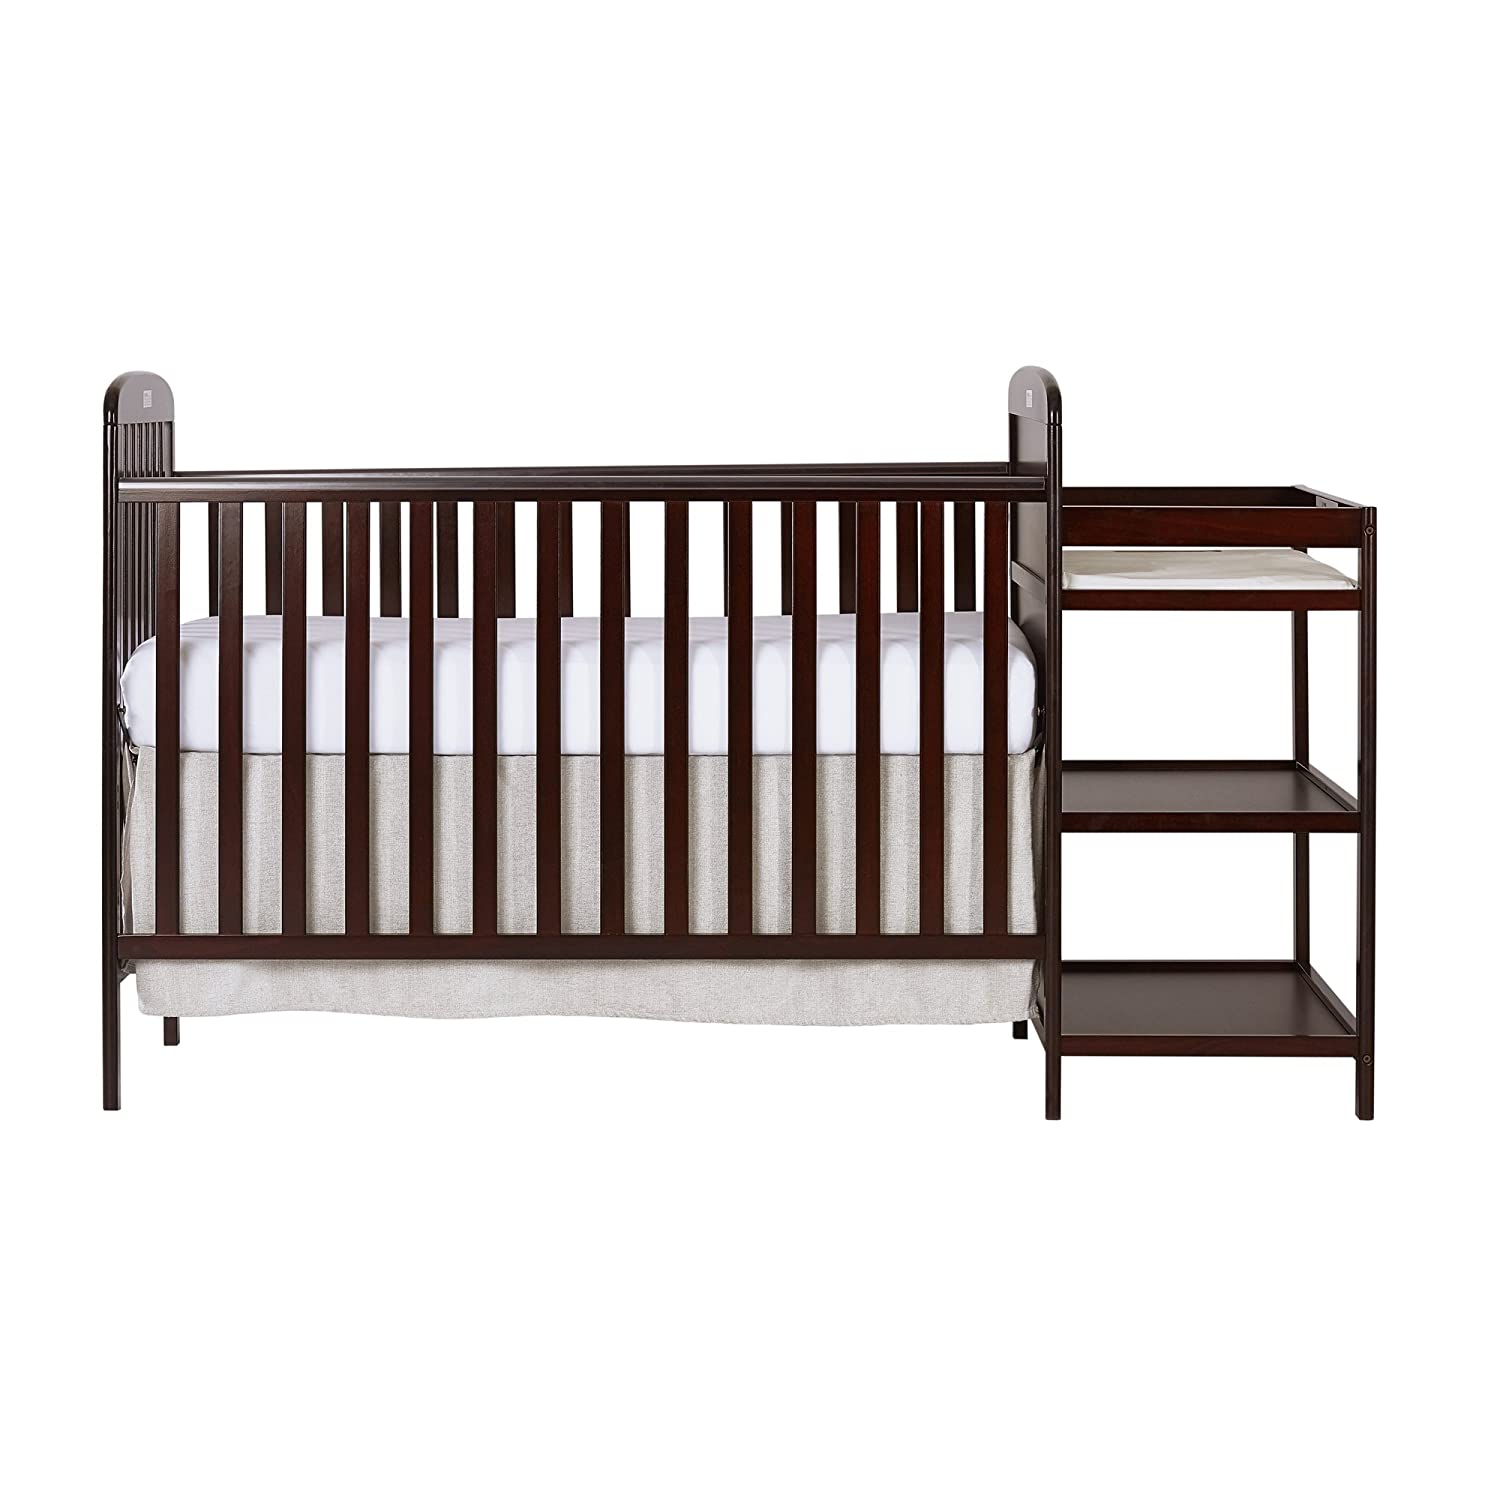 Photo 1 of Dream On Me Anna 4in1 Full Size Crib and Changing Table Combo Cherry
scratched